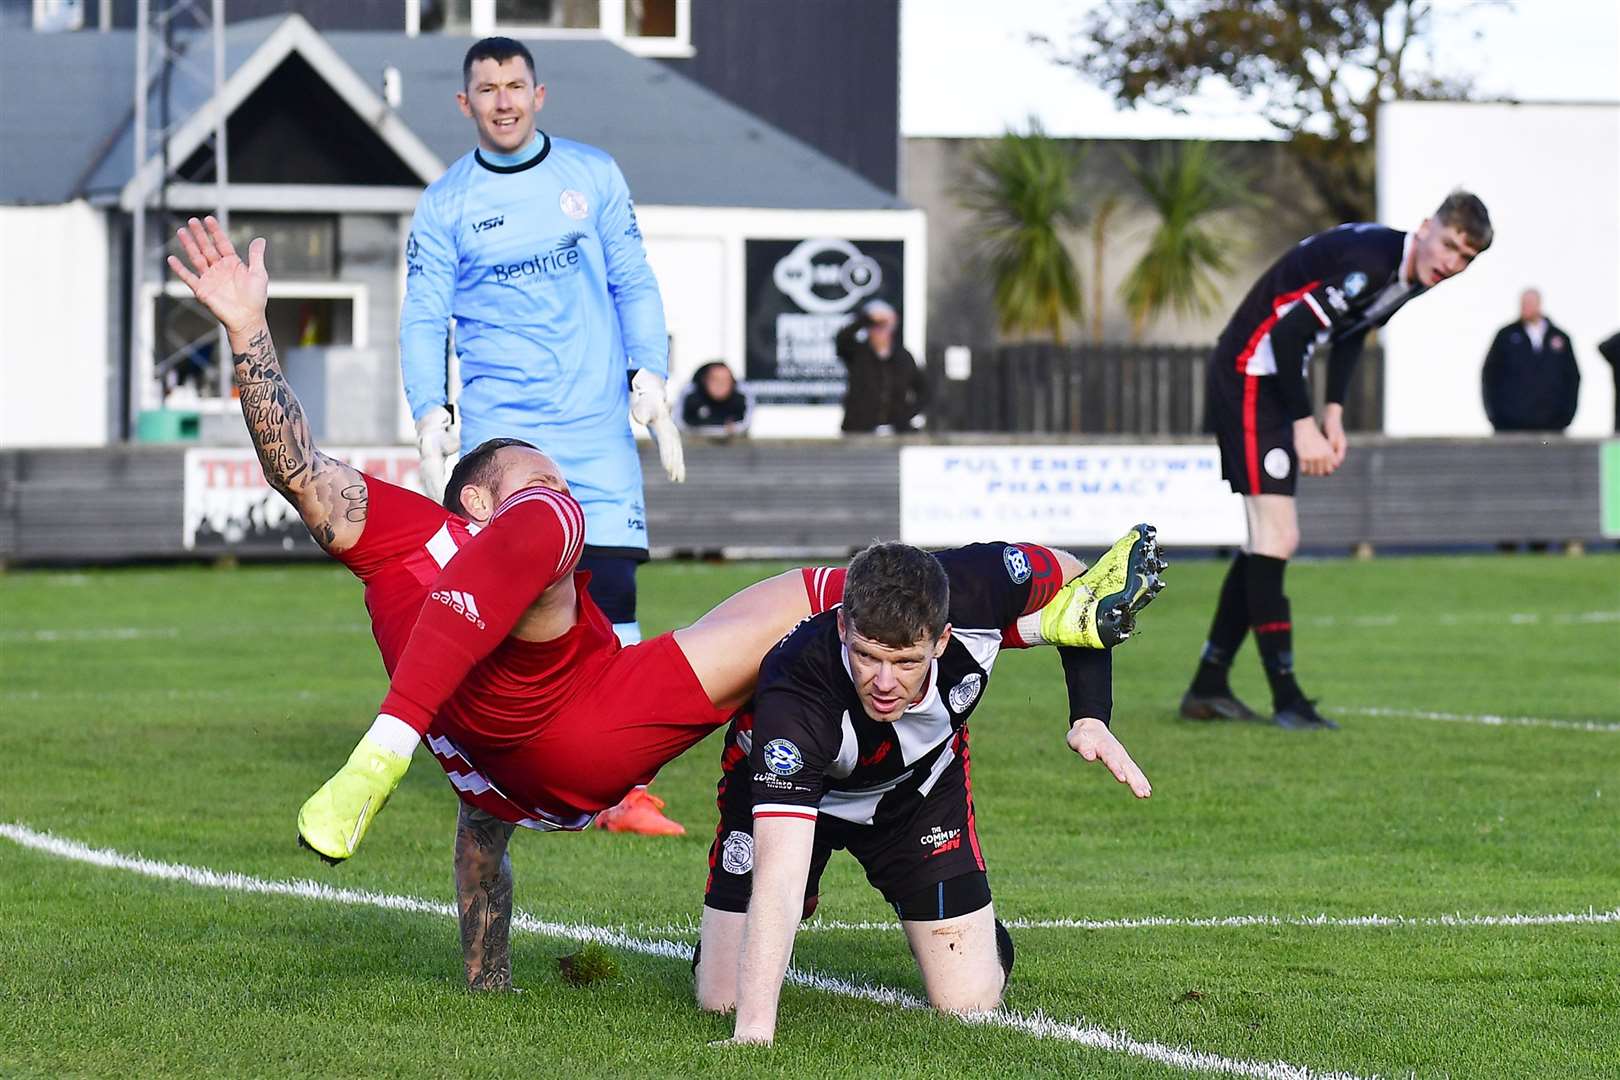 Formartine United's Jonathan Smith tumbles over Wick Academy's Ross Allan during the league match at Harmsworth Park last Saturday. Picture: Mel Roger